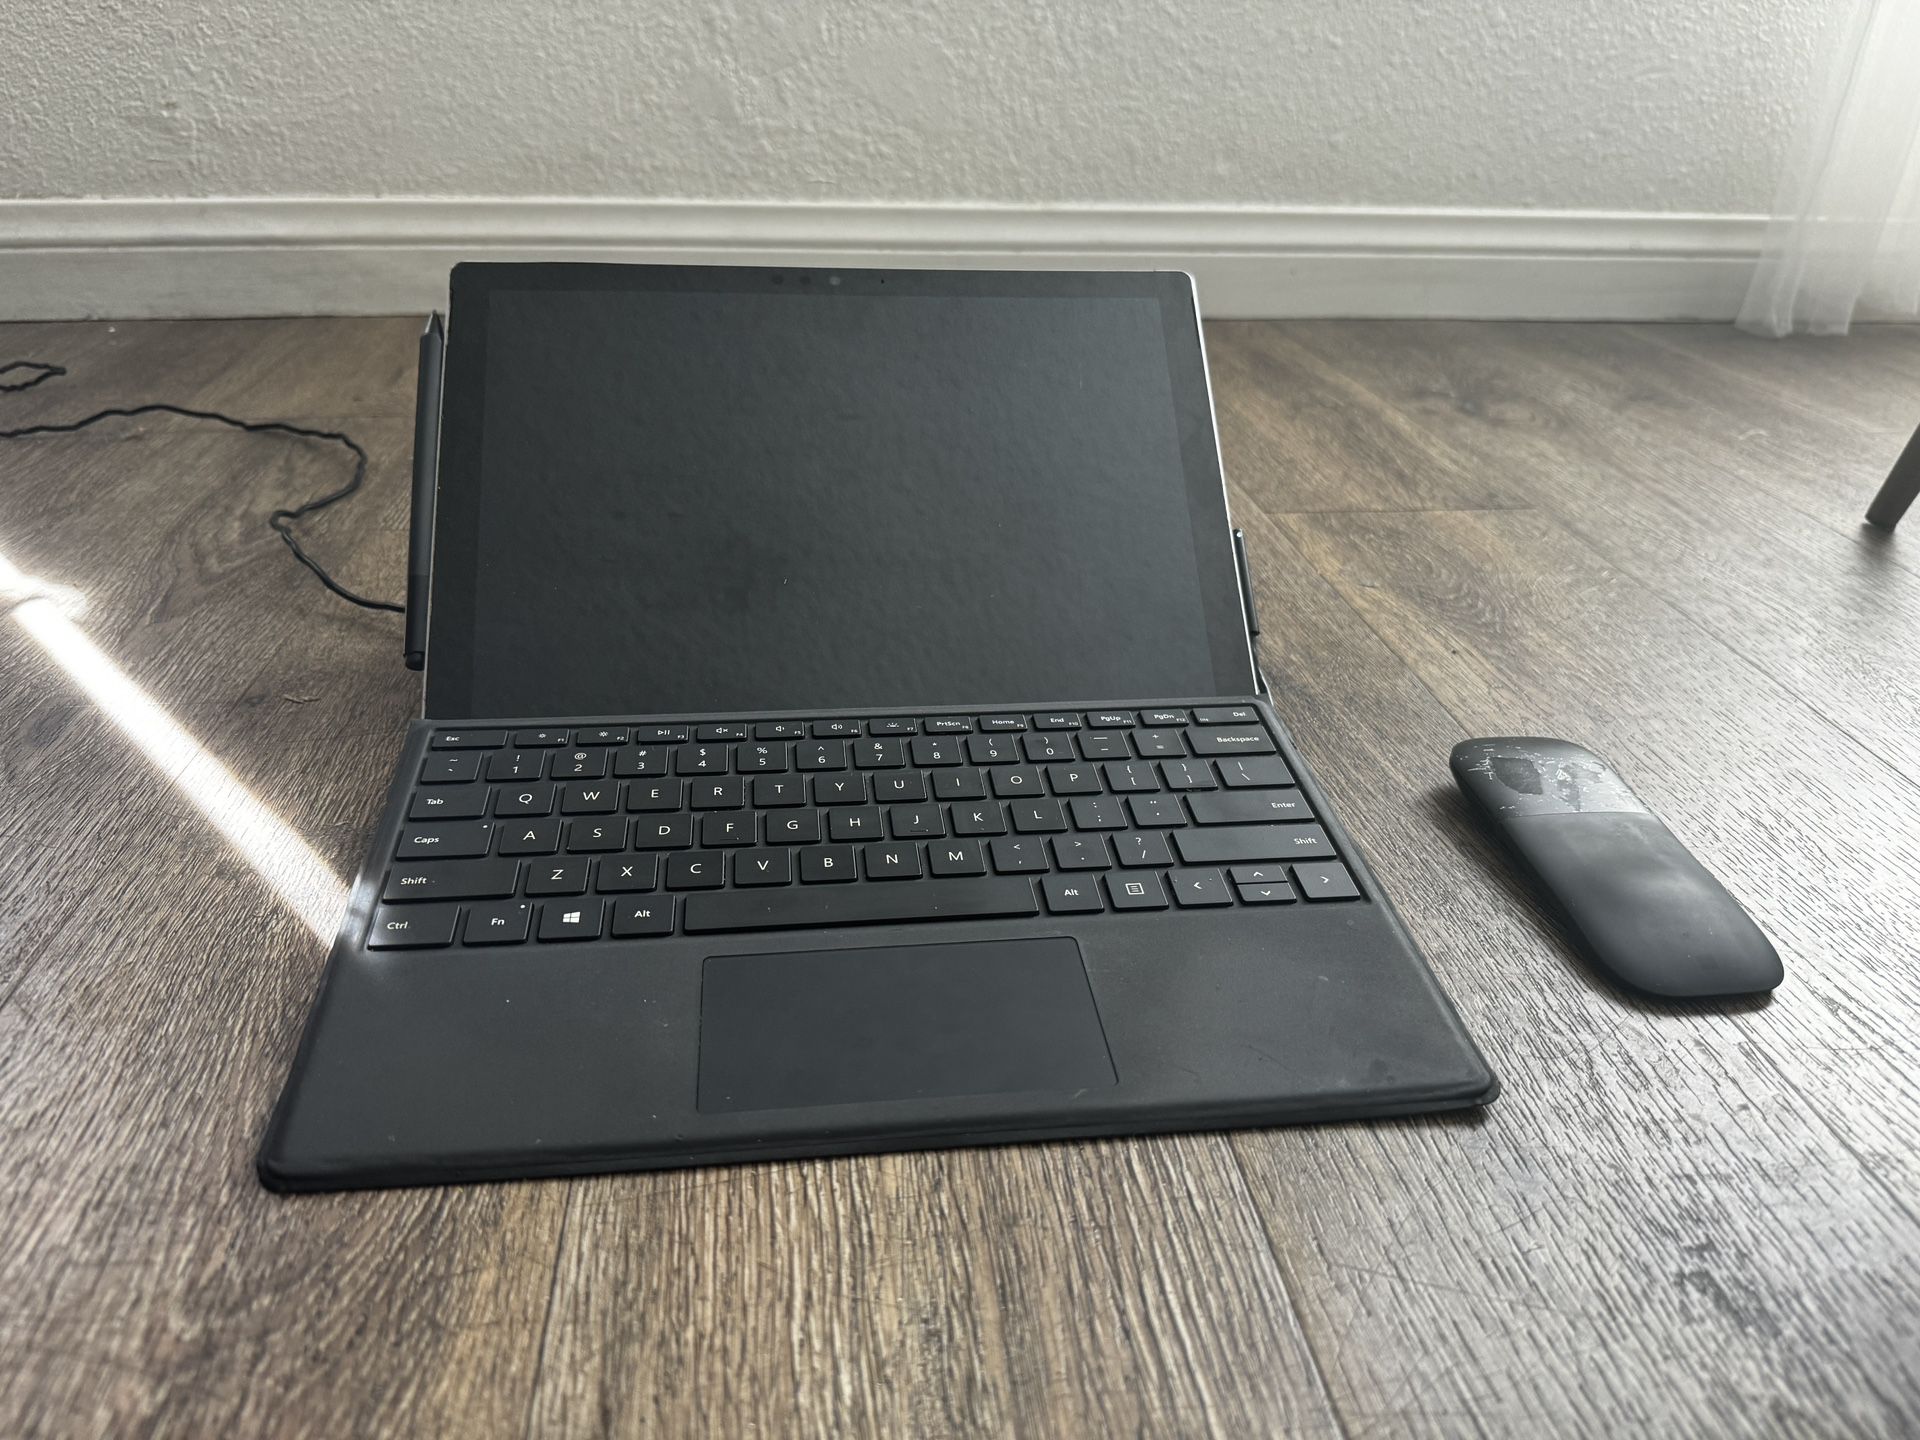 Microsoft Surface Pro 5 Laptop/Tablet - Barely Used 